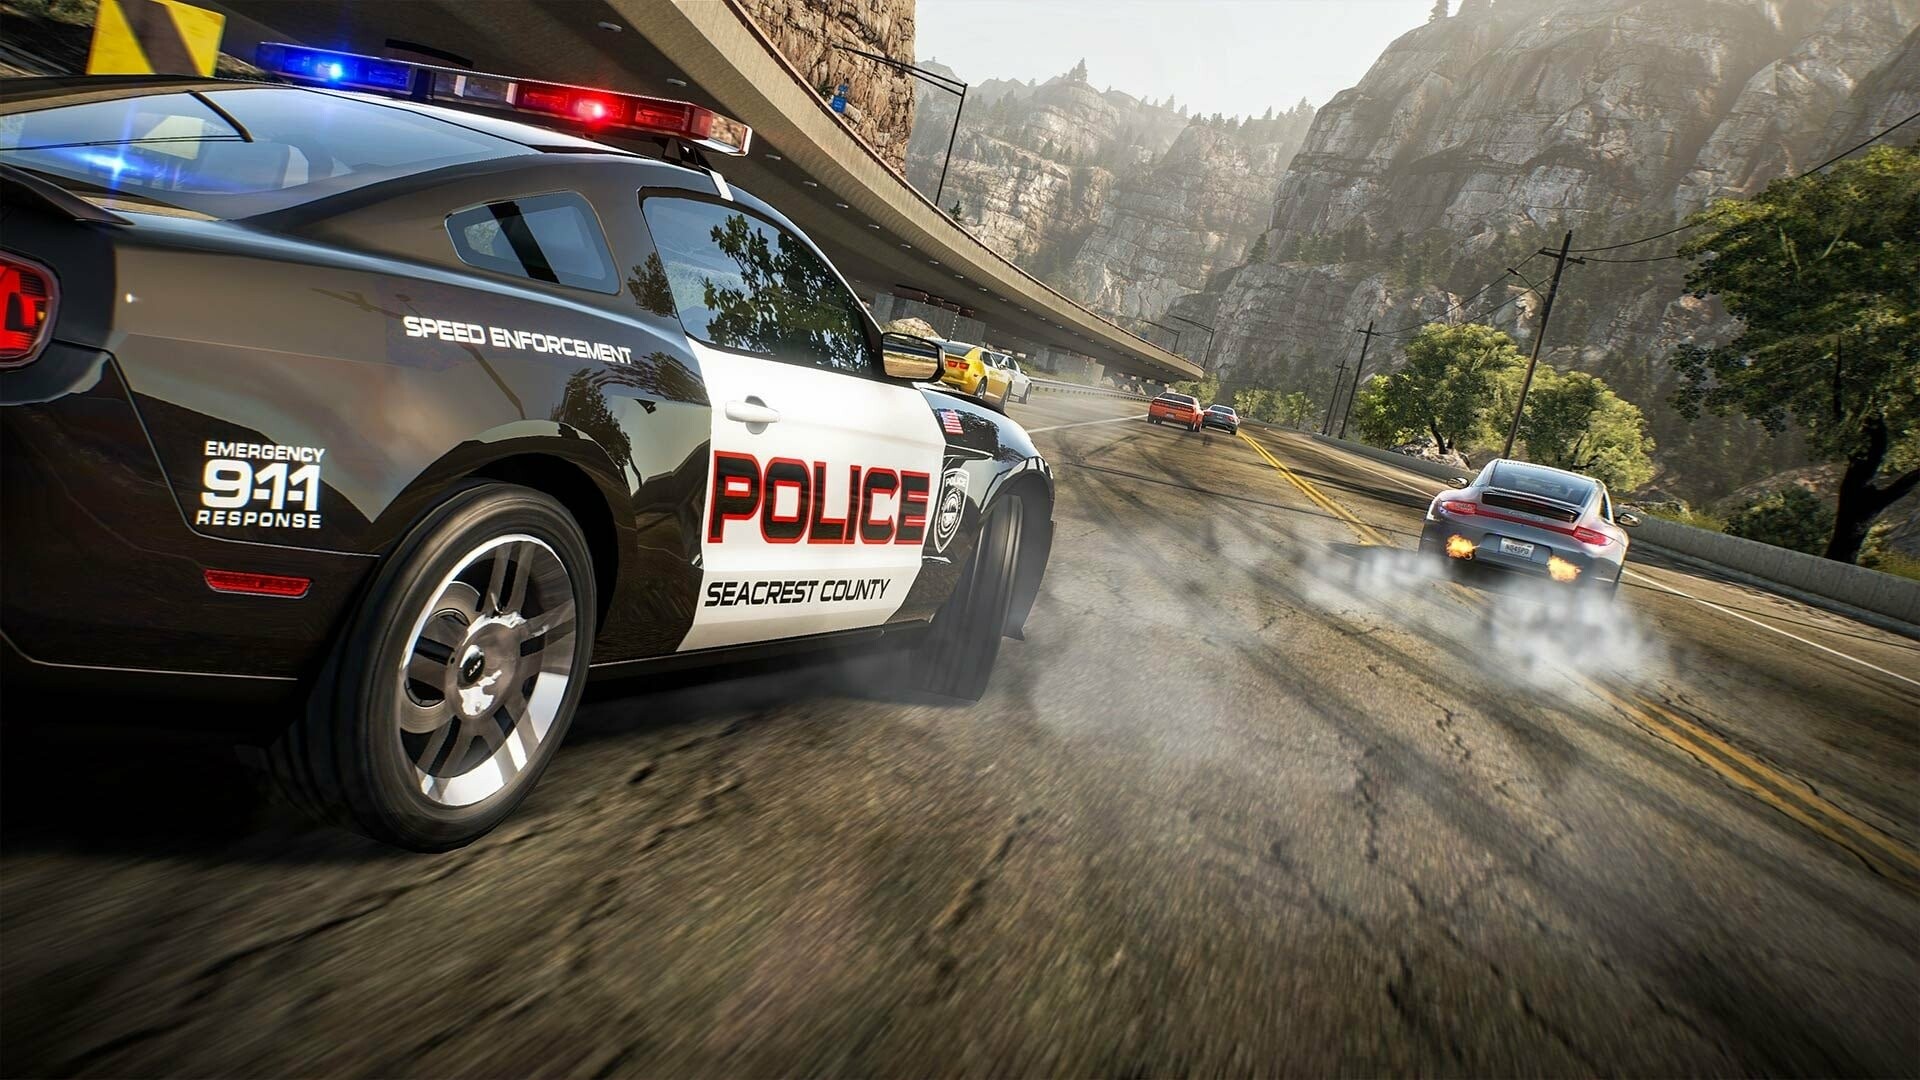 Need for Speed Hot Pursuit Remastered: The career mode revolves around the increasingly fought over Seacrest County. 1920x1080 Full HD Wallpaper.